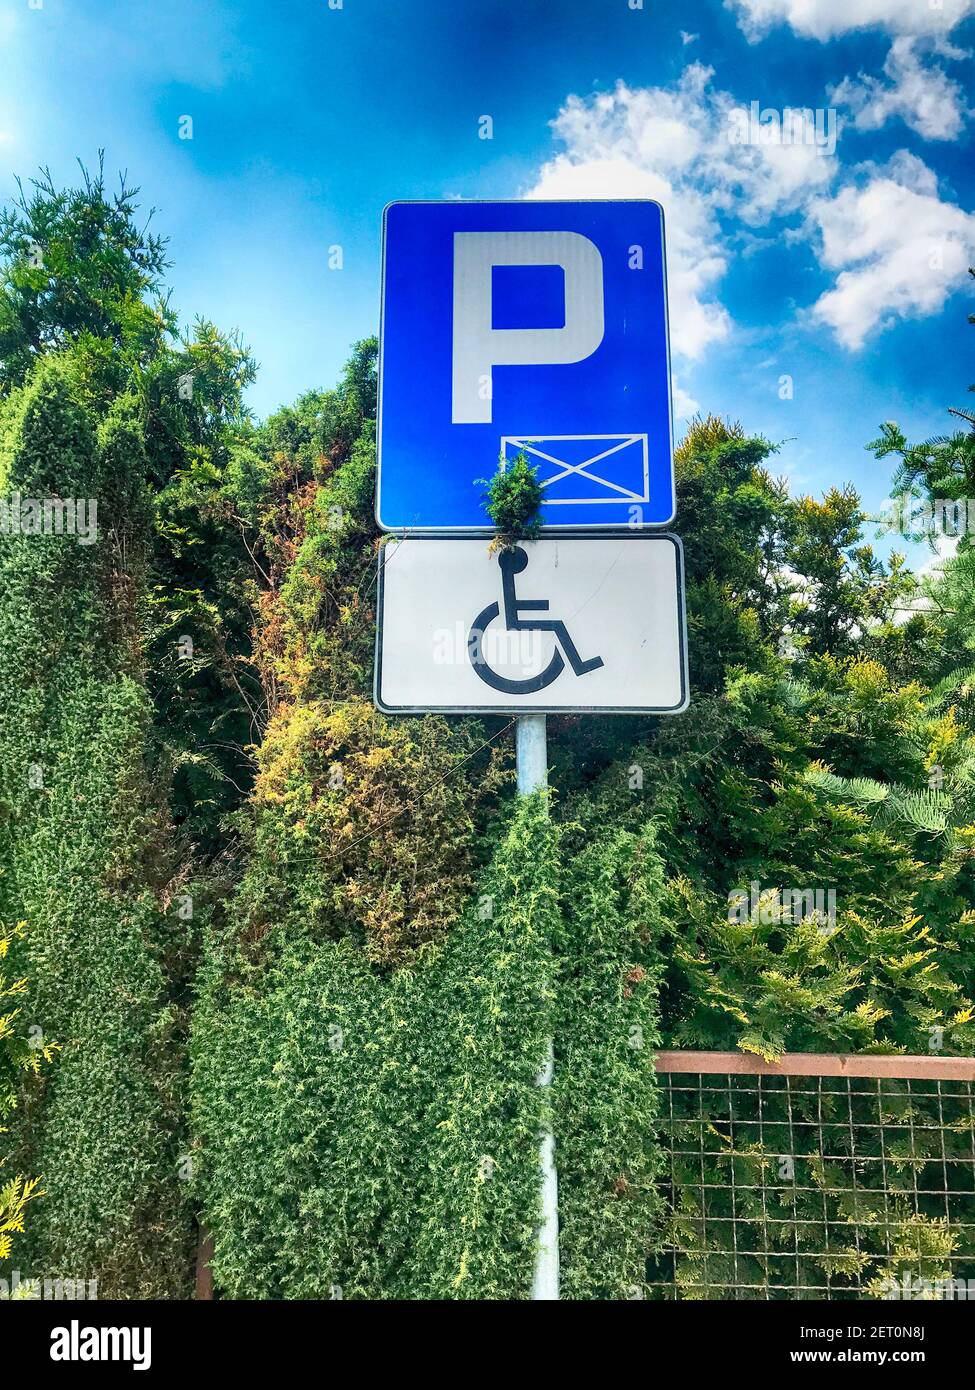 Handicapped parking sign by trees, Poland Stock Photo